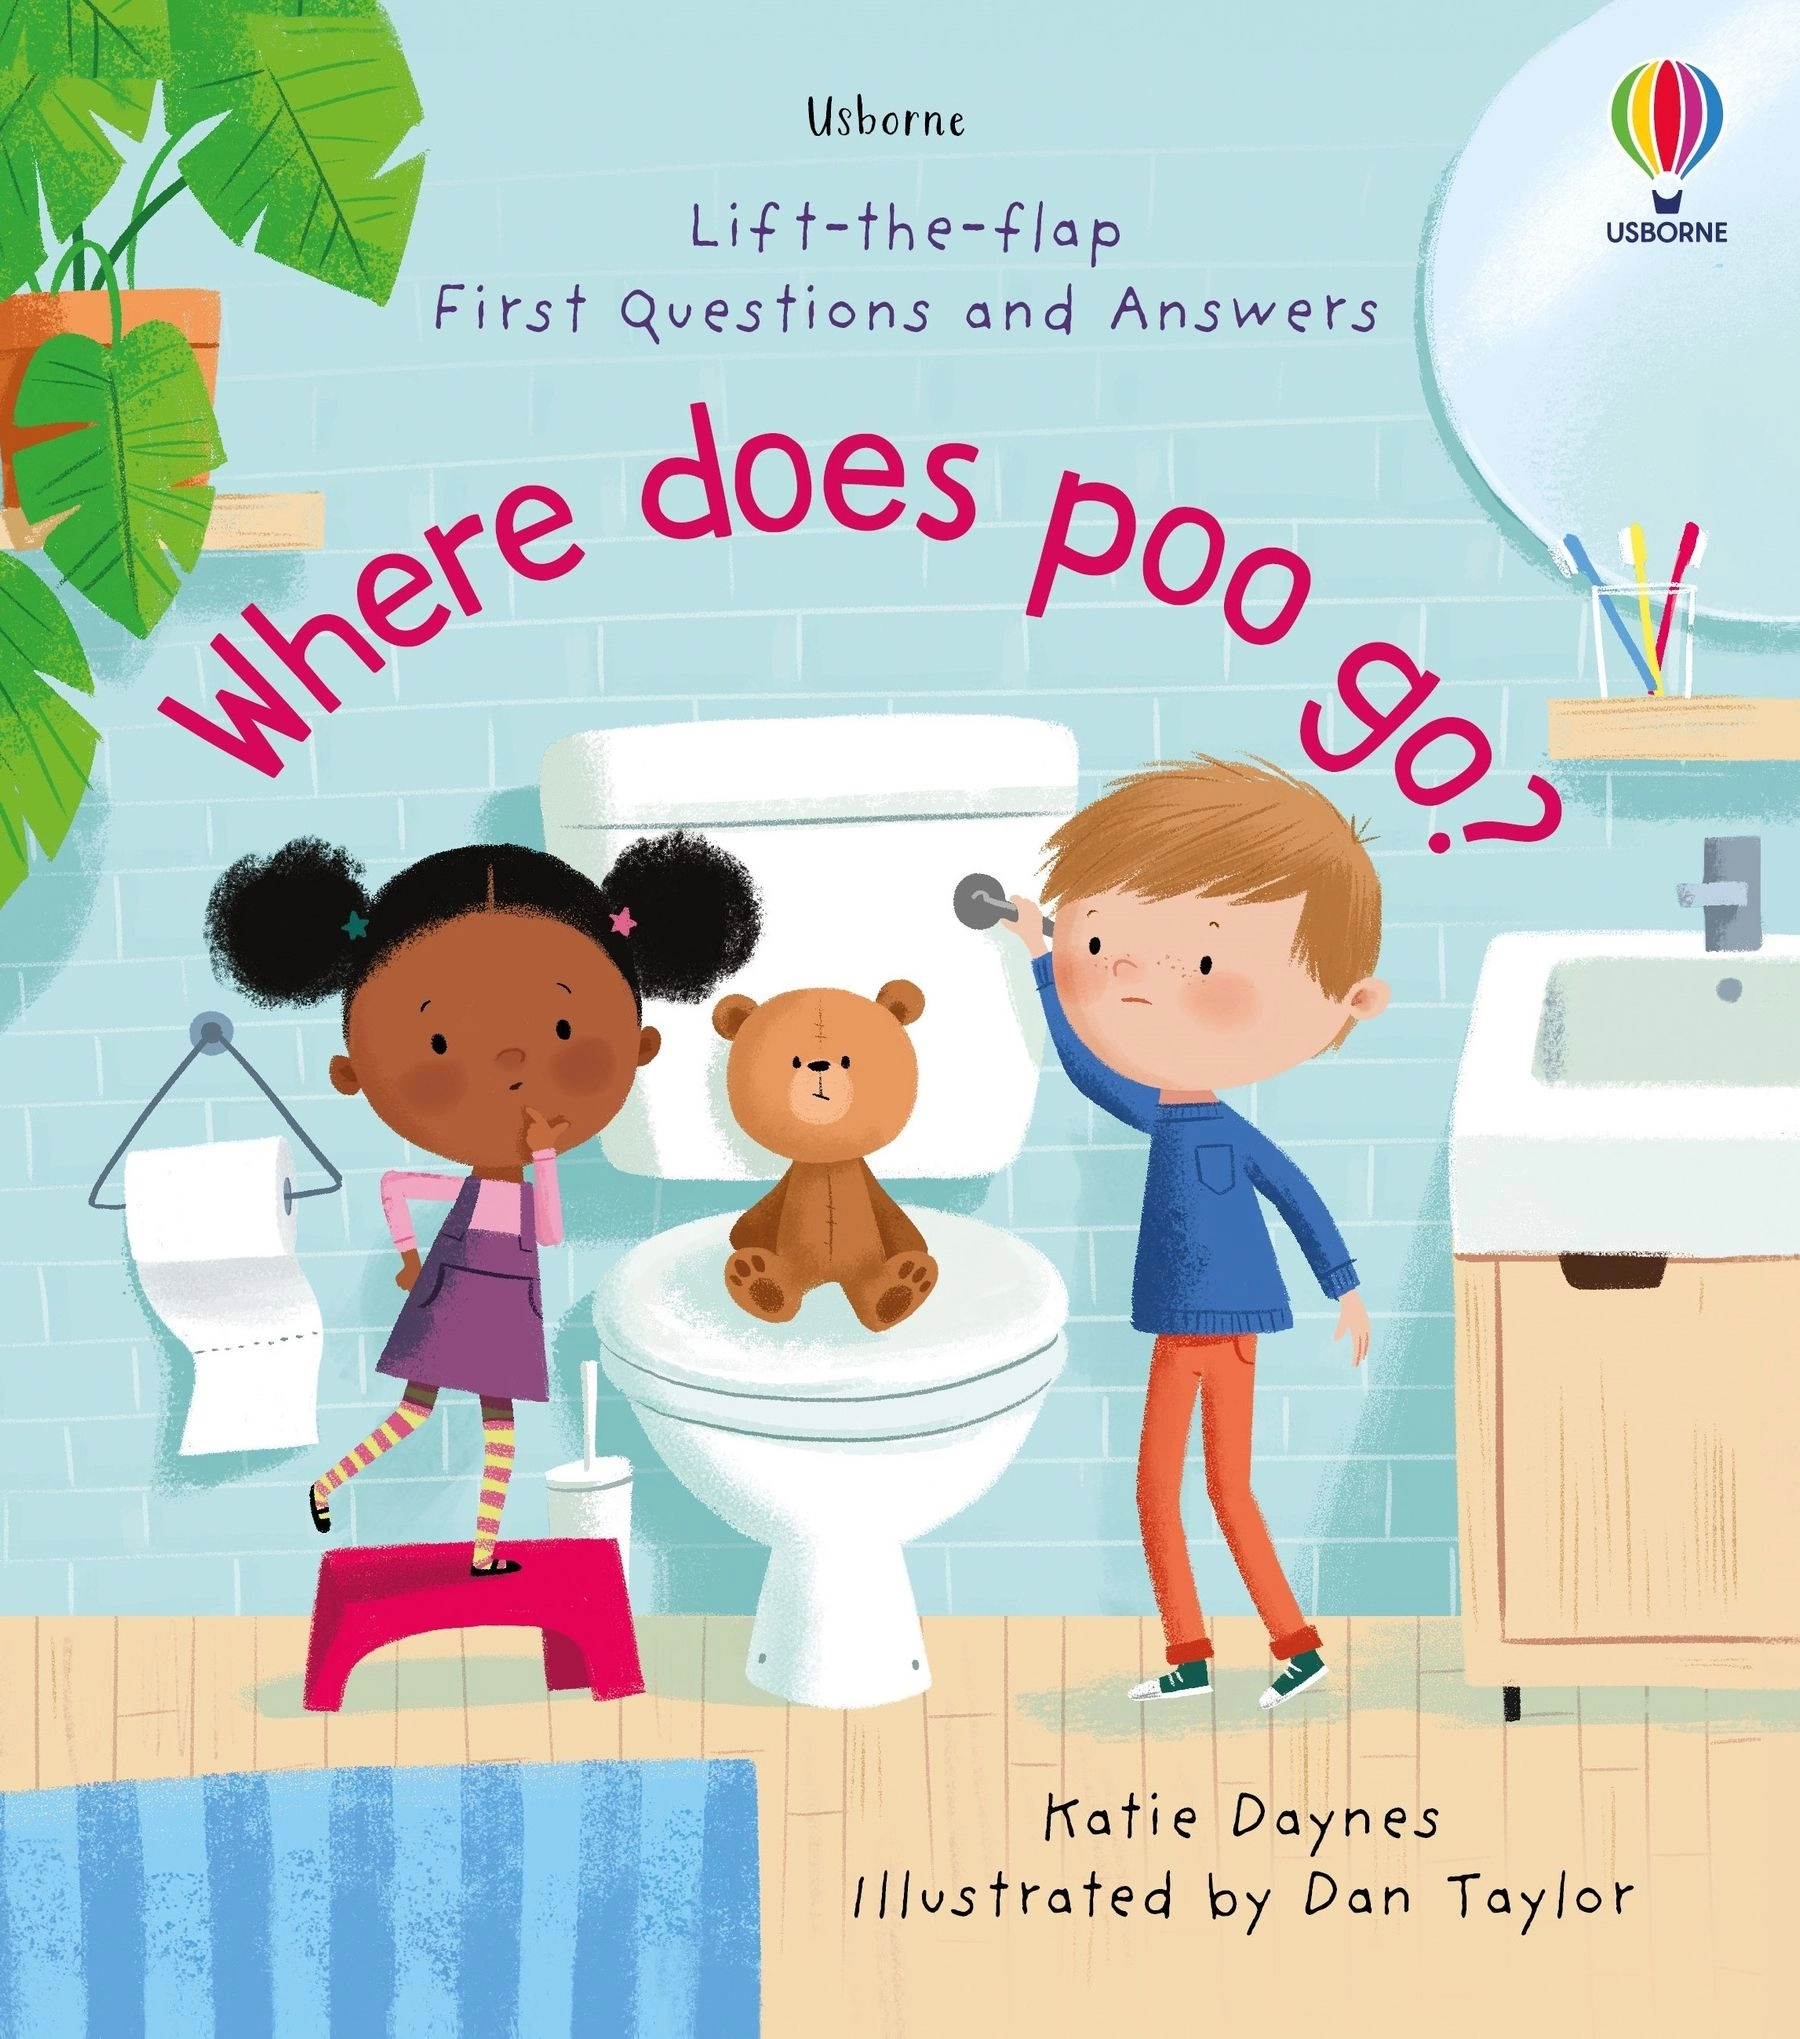 LIFT-THE-FLAP FIRST QUESTIONS AND ANSWERS - WHERE DOES POO GO?